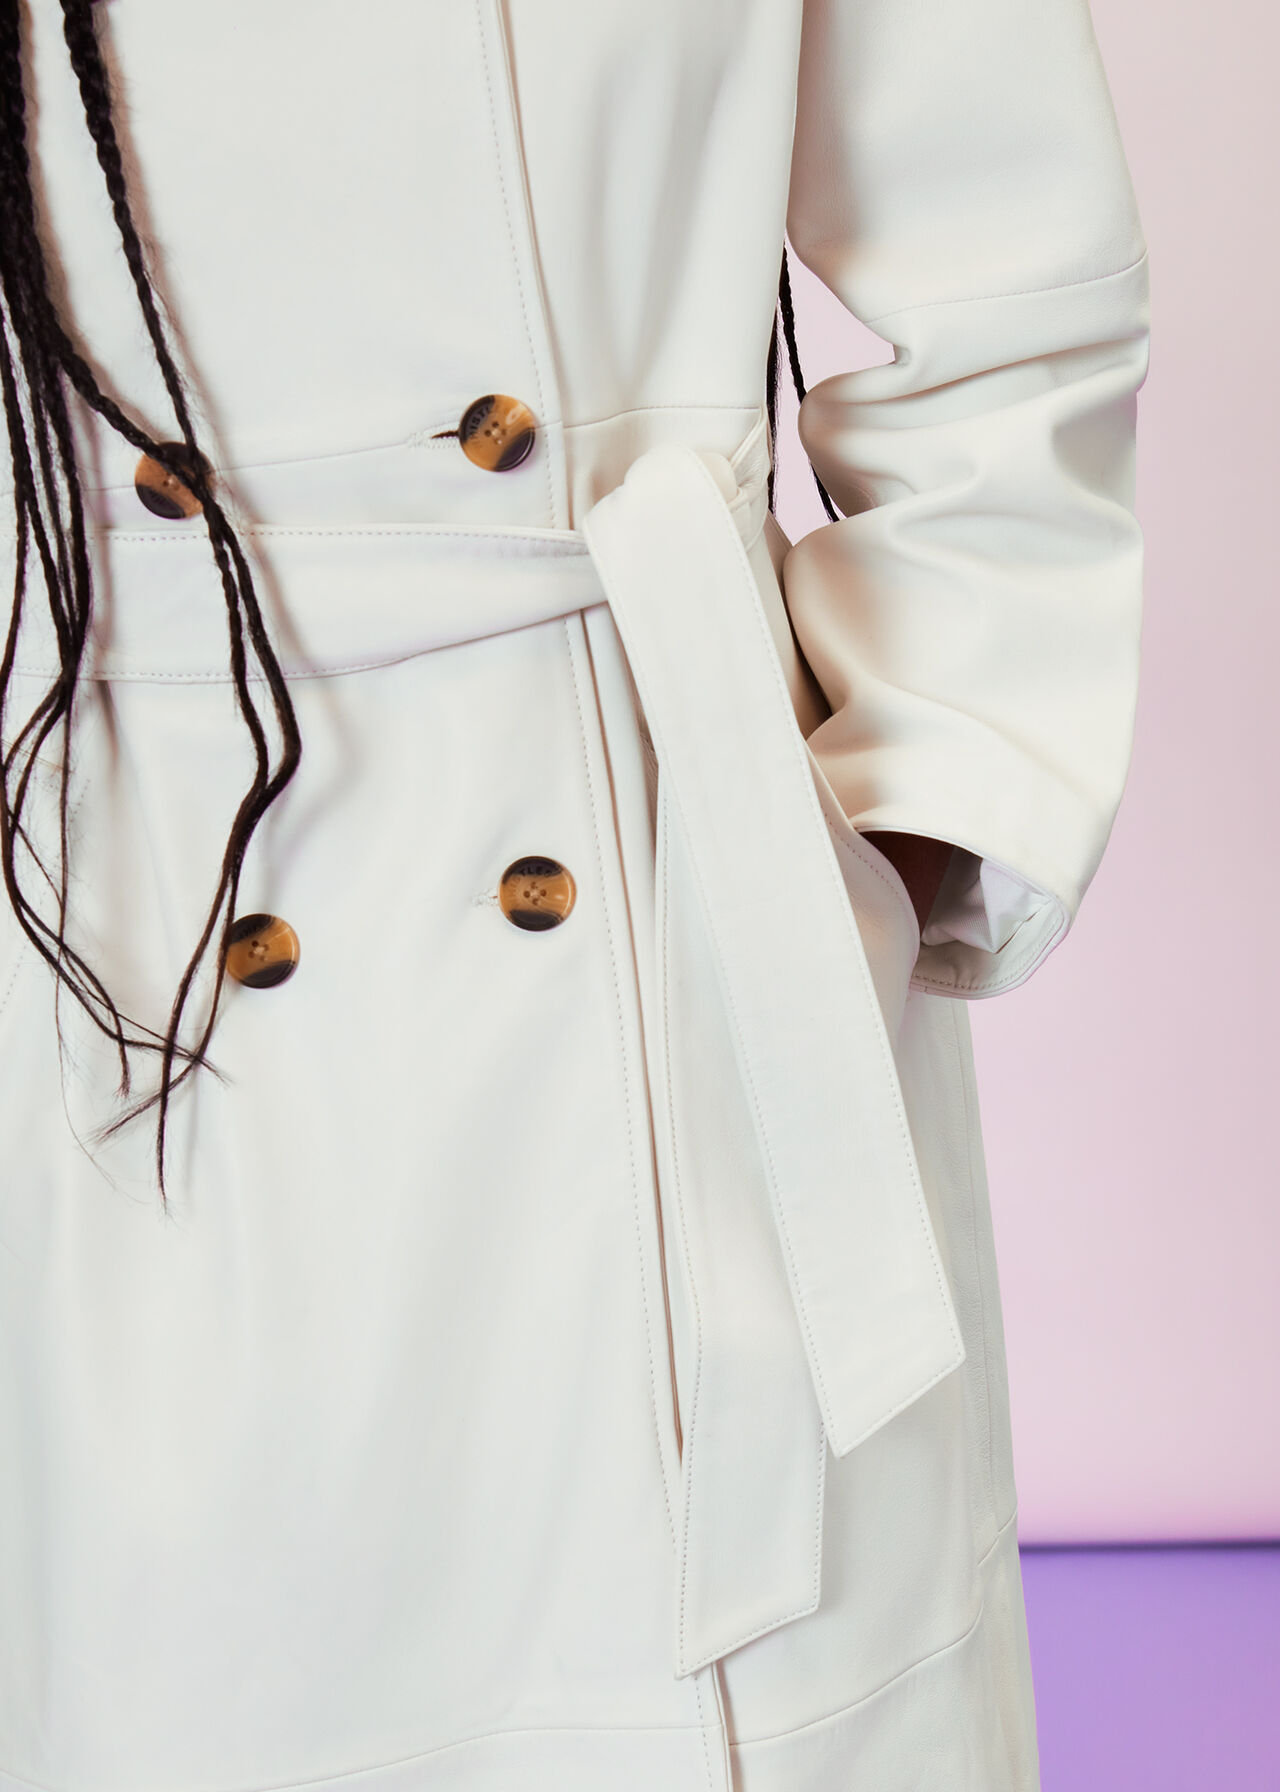 Gemma Leather Trench Coat